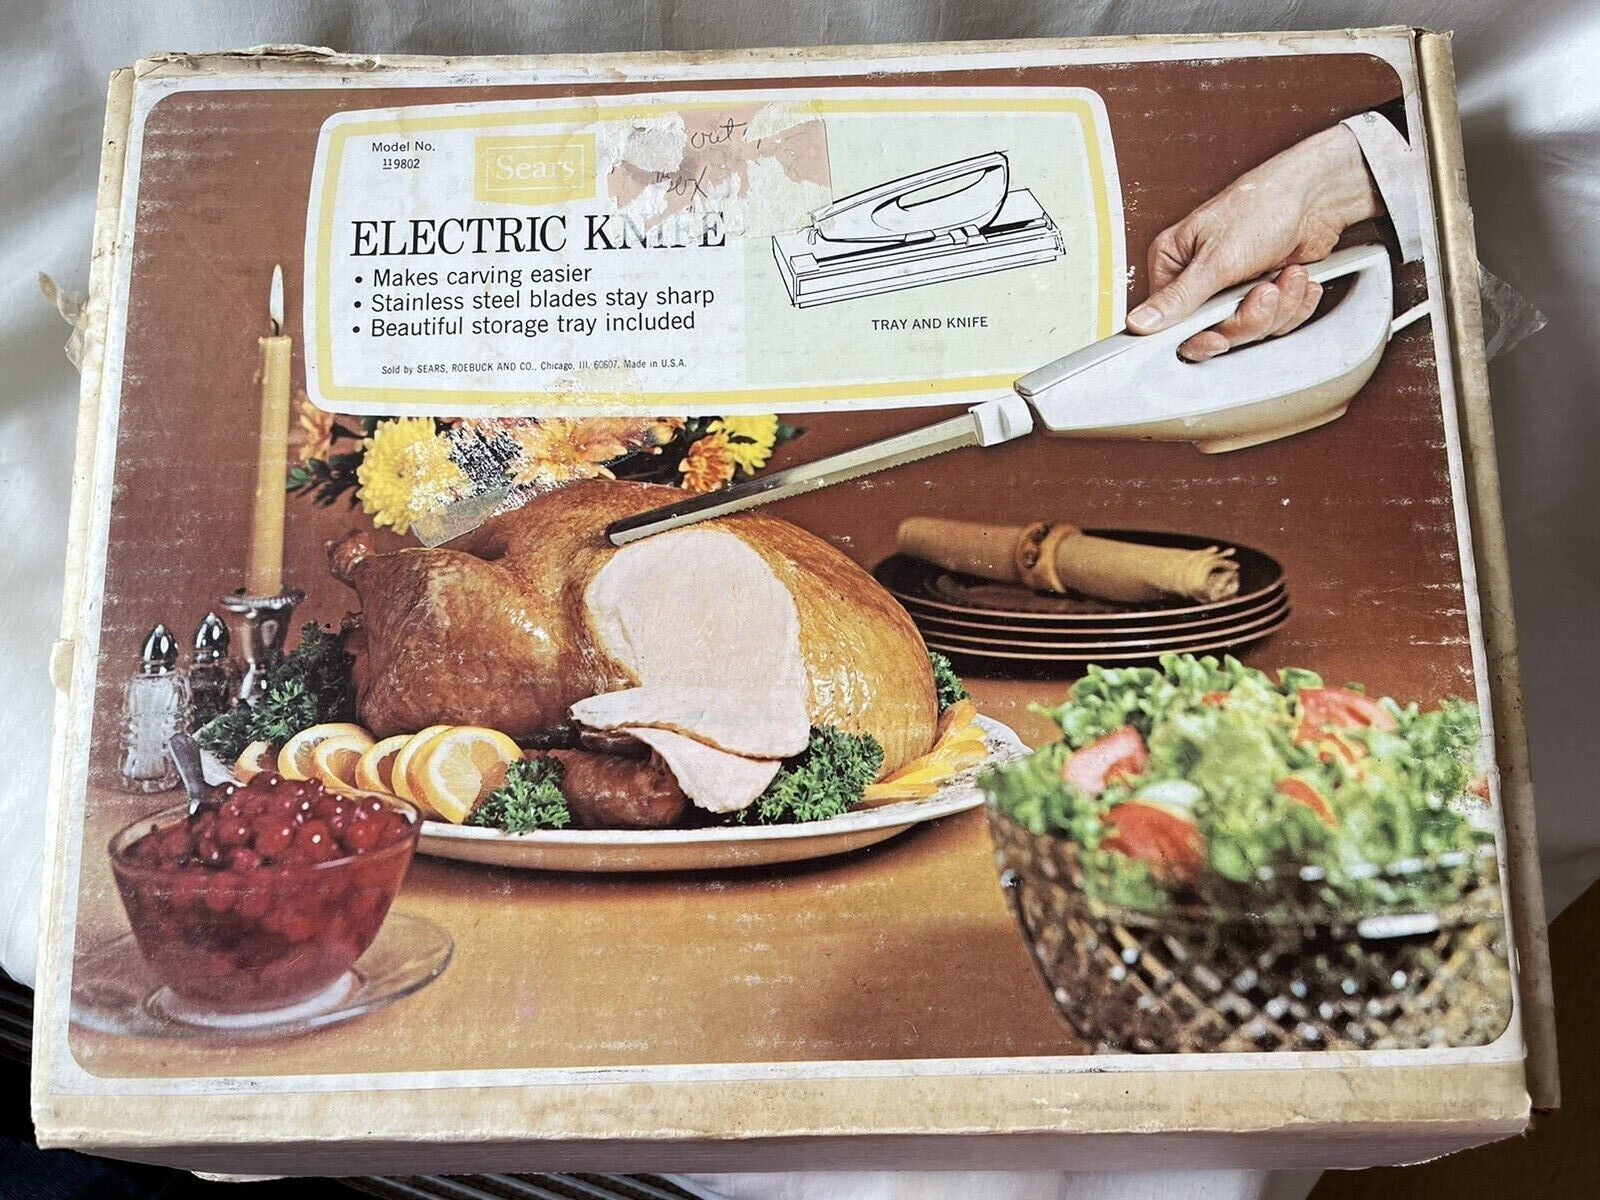 Sears Electric Knife with Storage Tray Vintage